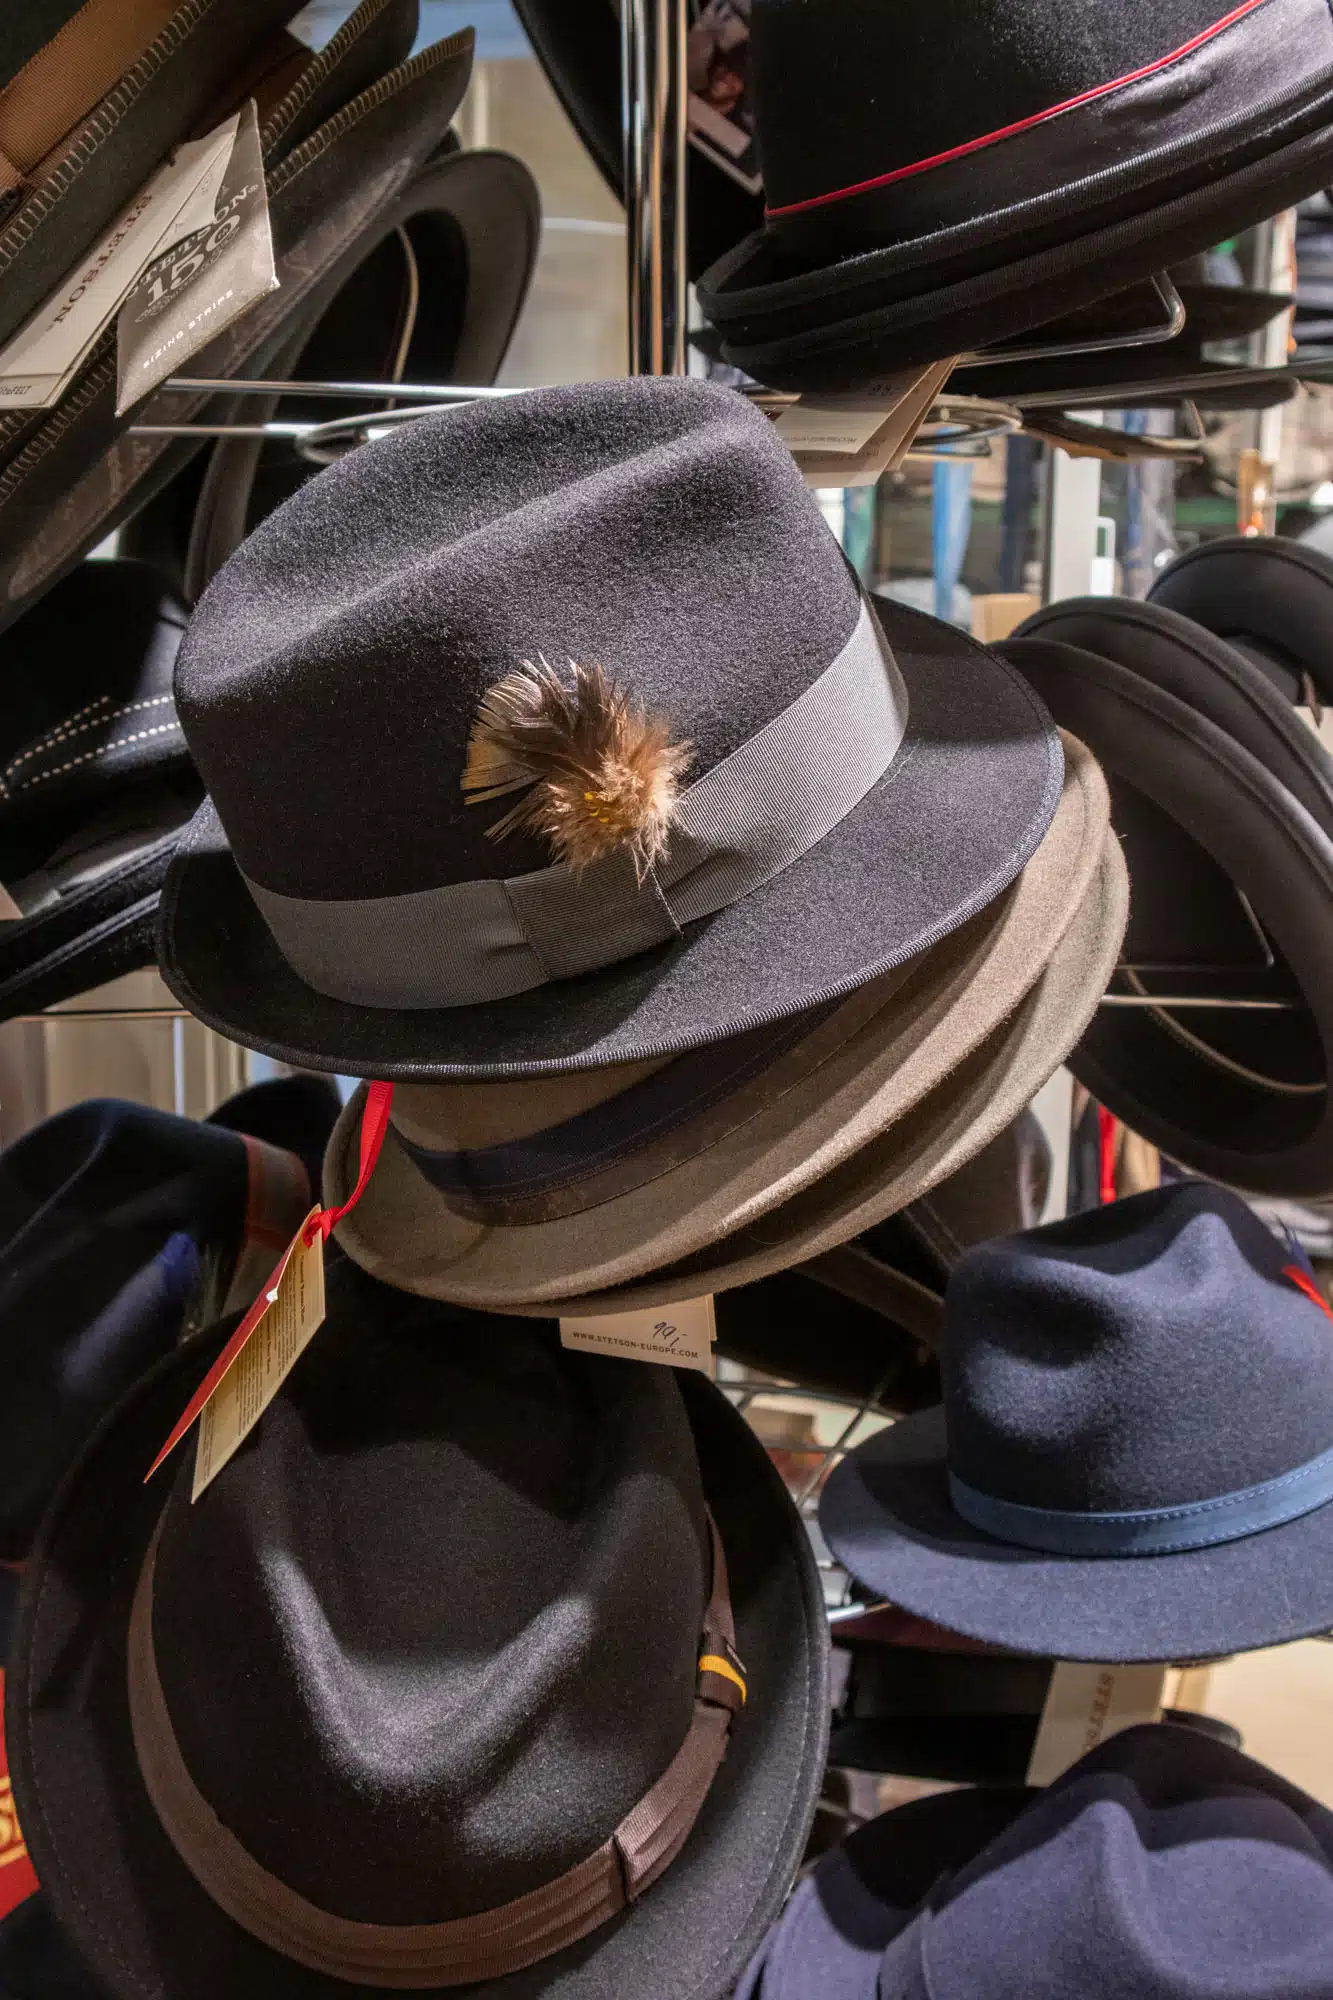 Trilby hat on display